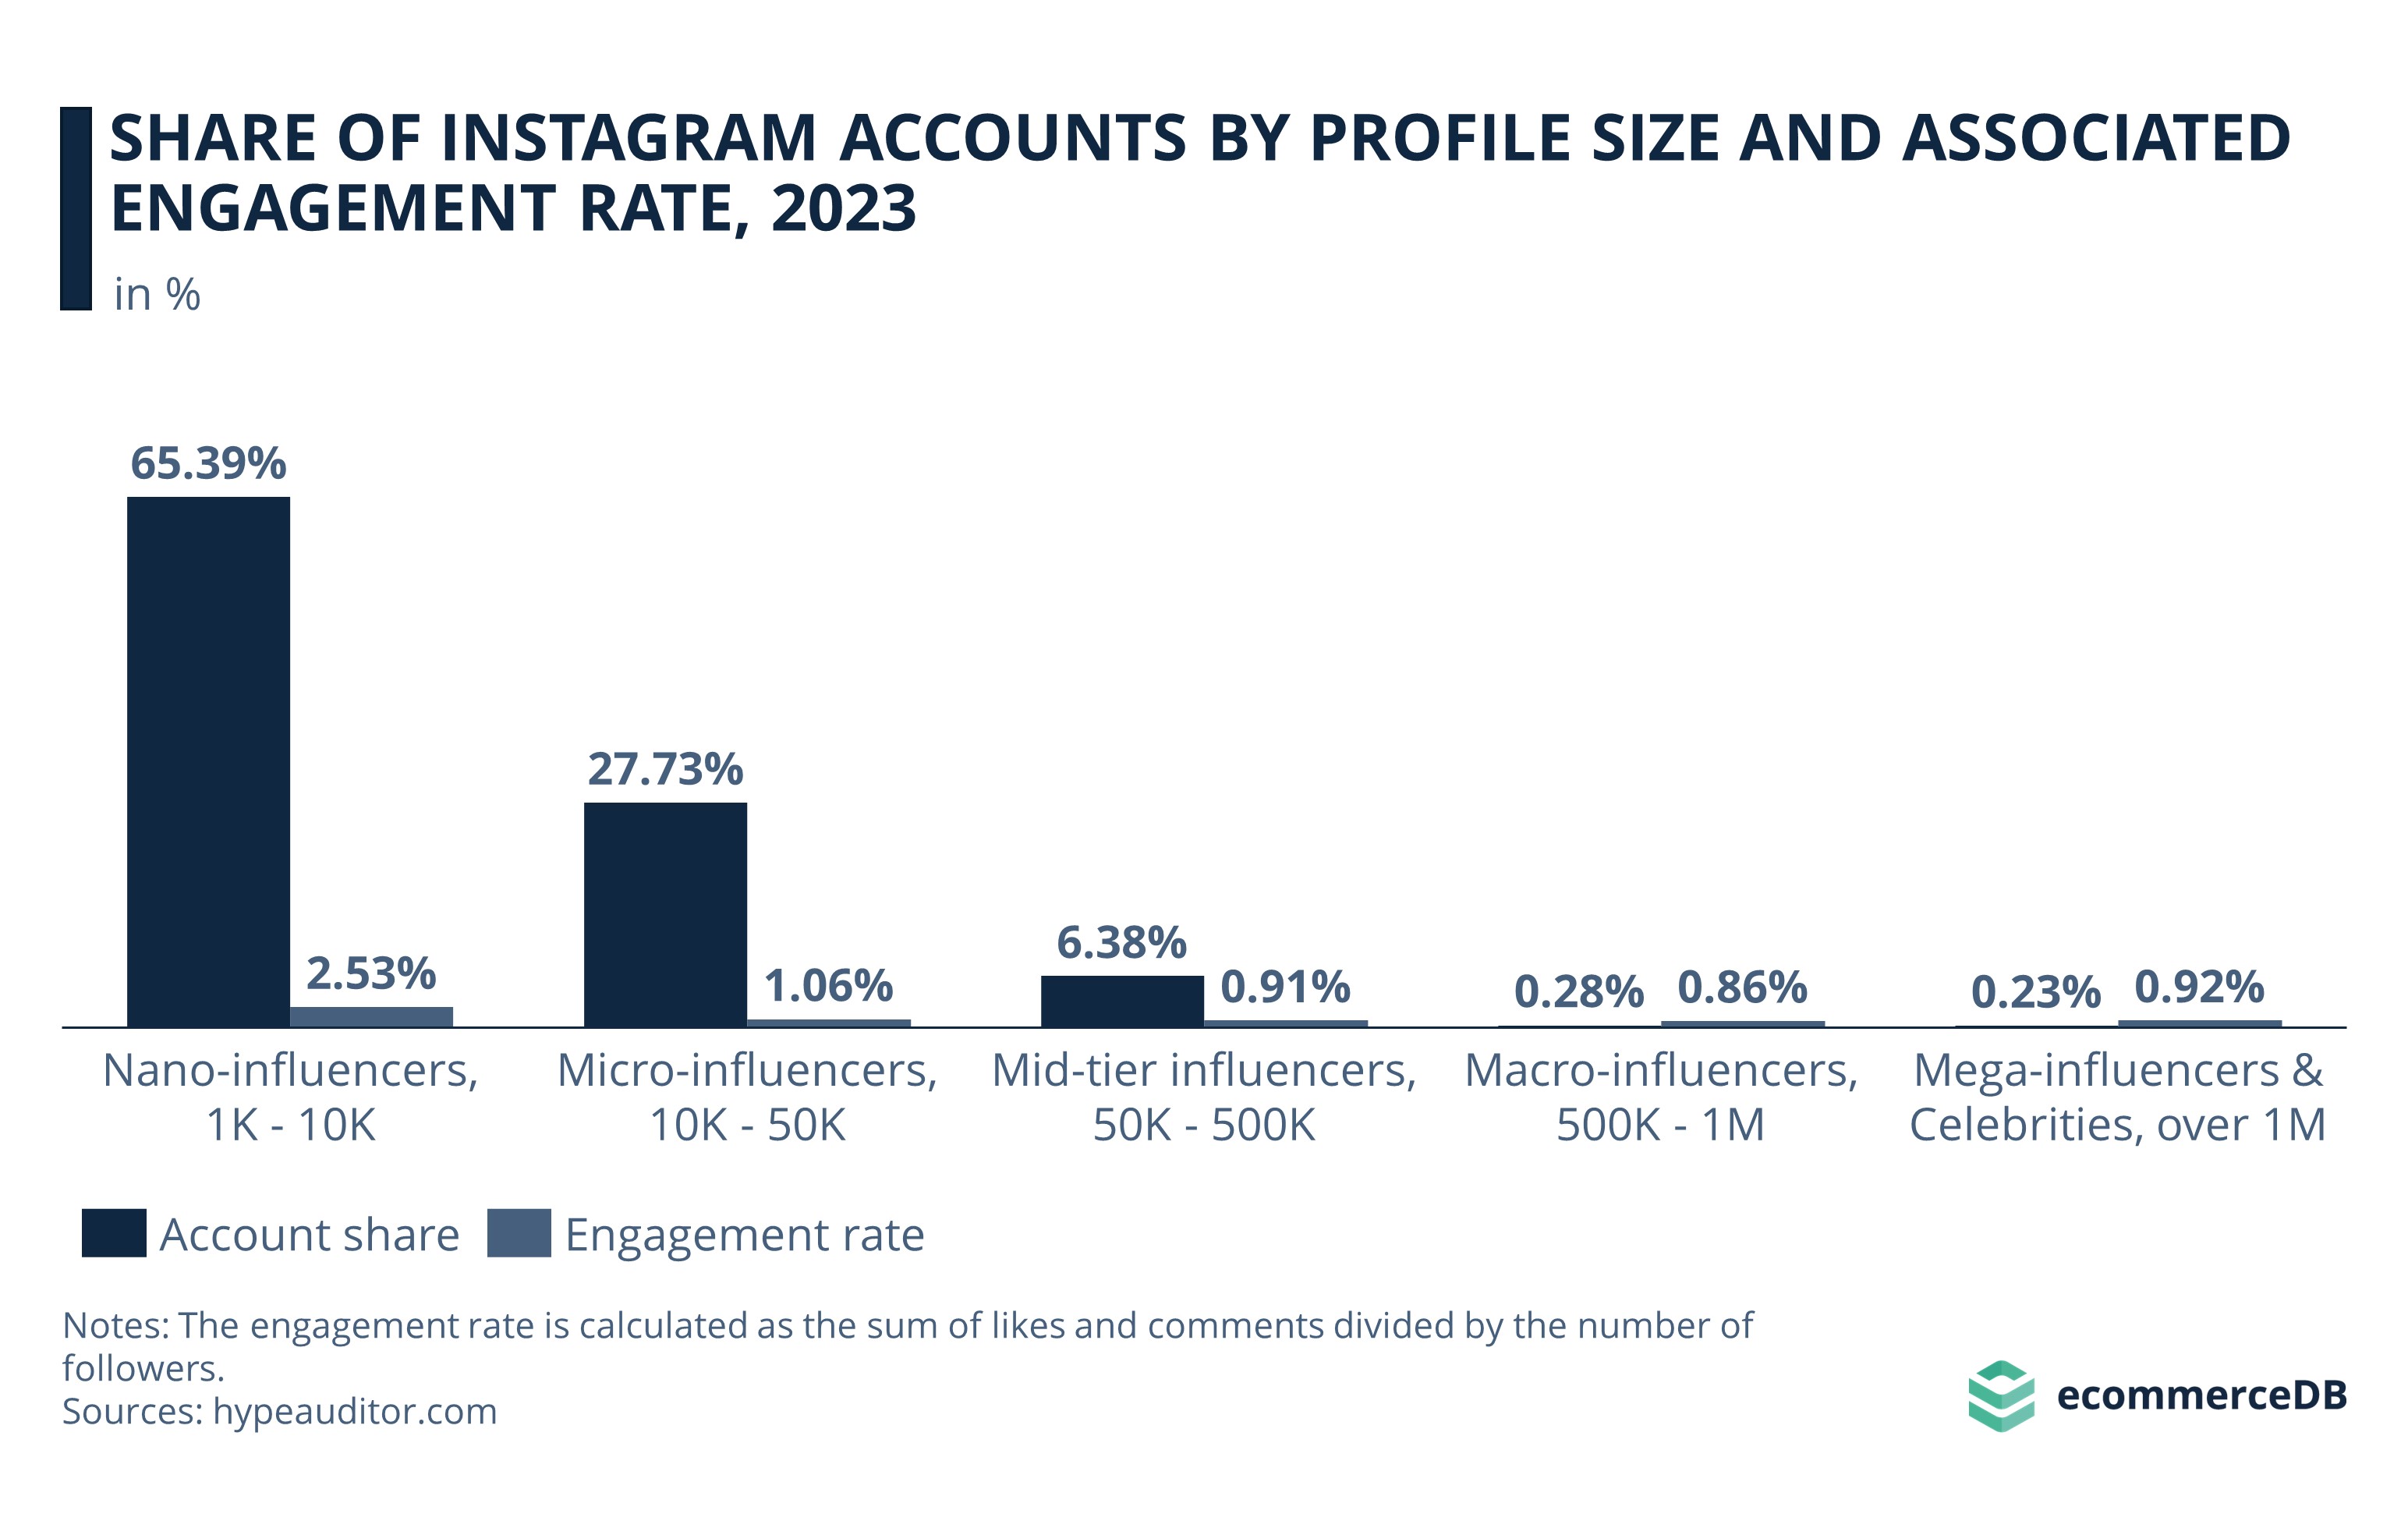 Share of Instagram Accounts by Profile Size and Associated Engagement Rate, 2023